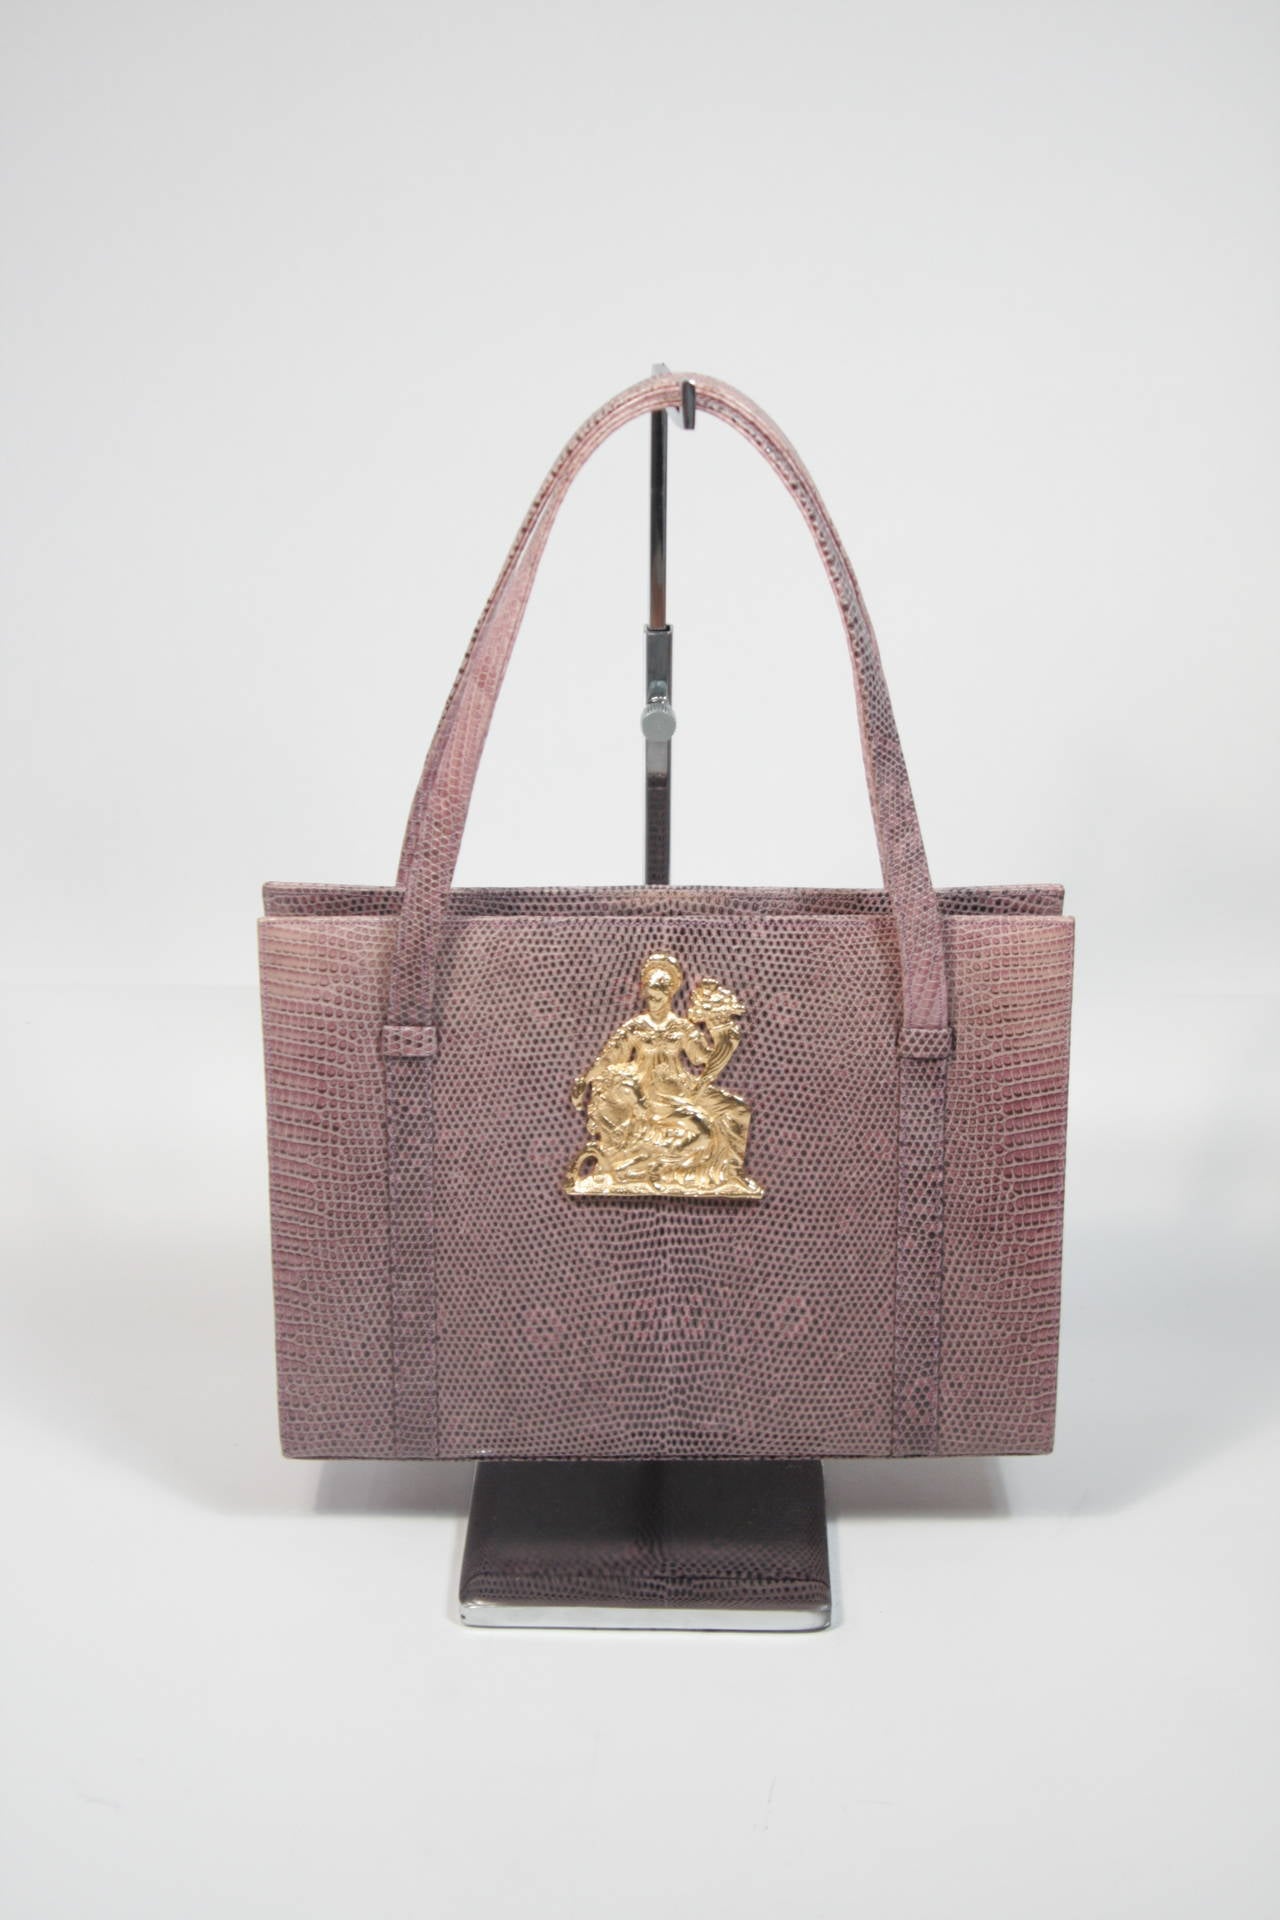 This vintage Martin Van Schaak design is available for viewing at our Beverly Hills Boutique. We offer a large selection of evening gowns and luxury garments.

This purse is composed of a purple snakeskin and features a gold exterior accent of a